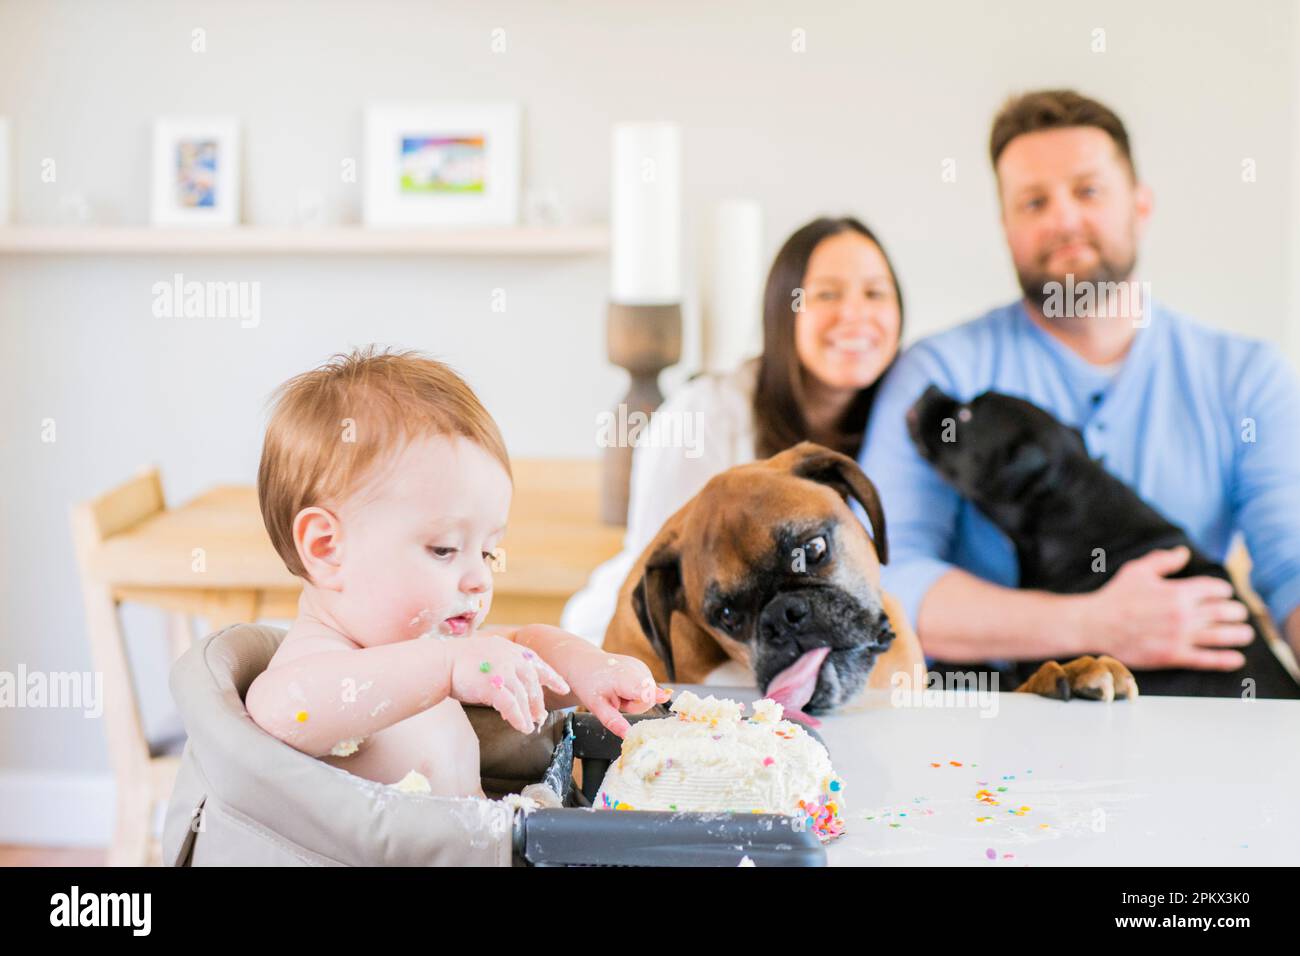 A Baby's first year celebration Stock Photo